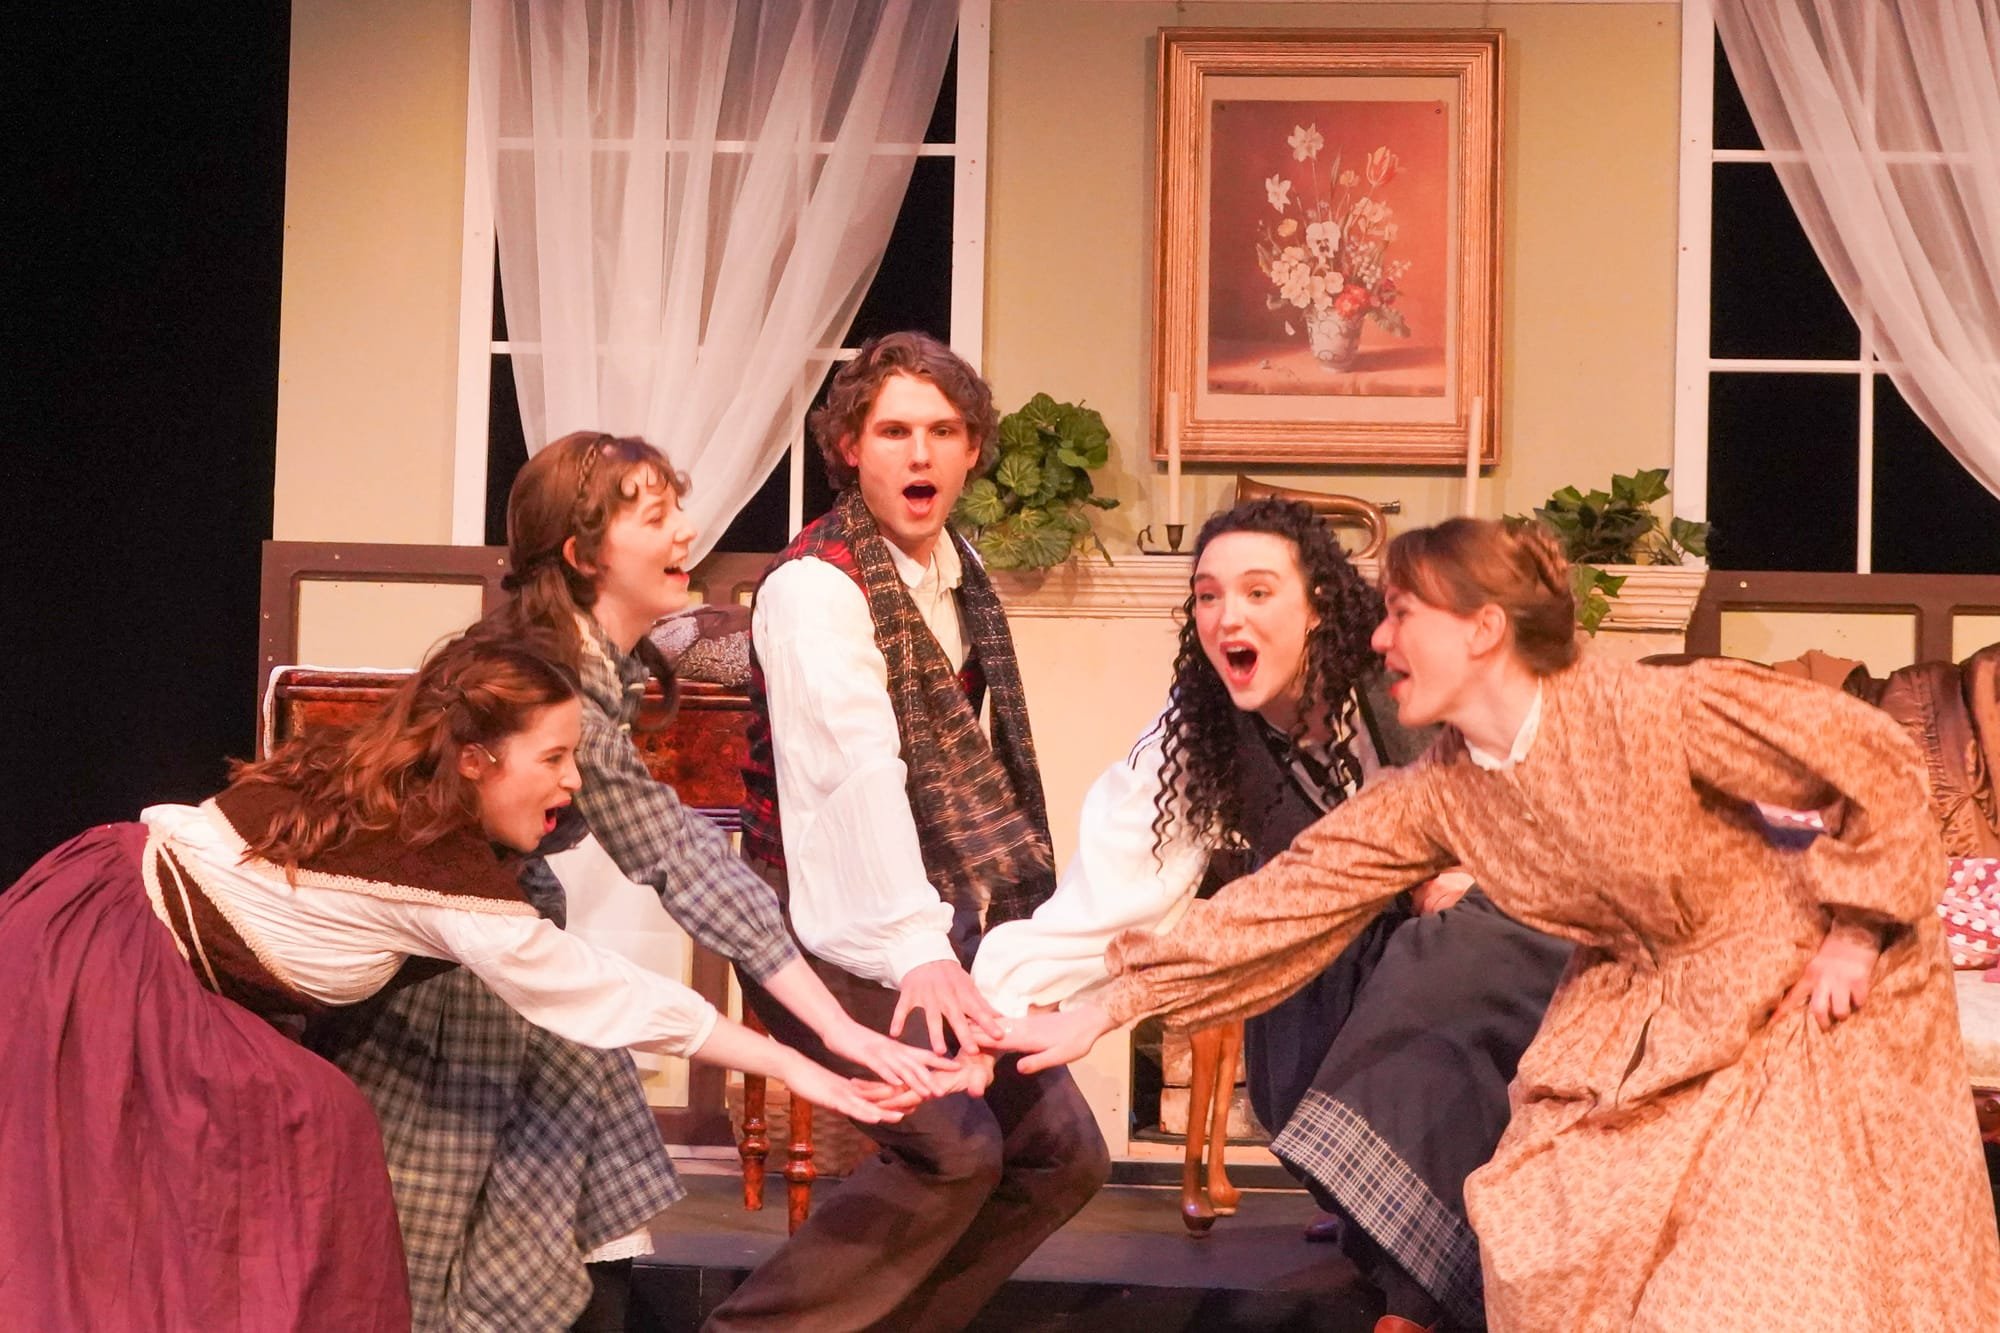 "Little Women" the Musical - Allan Knee, Jason Howland & Mindi Dickstein - Concord Players (Concord, MA.) - REVIEW